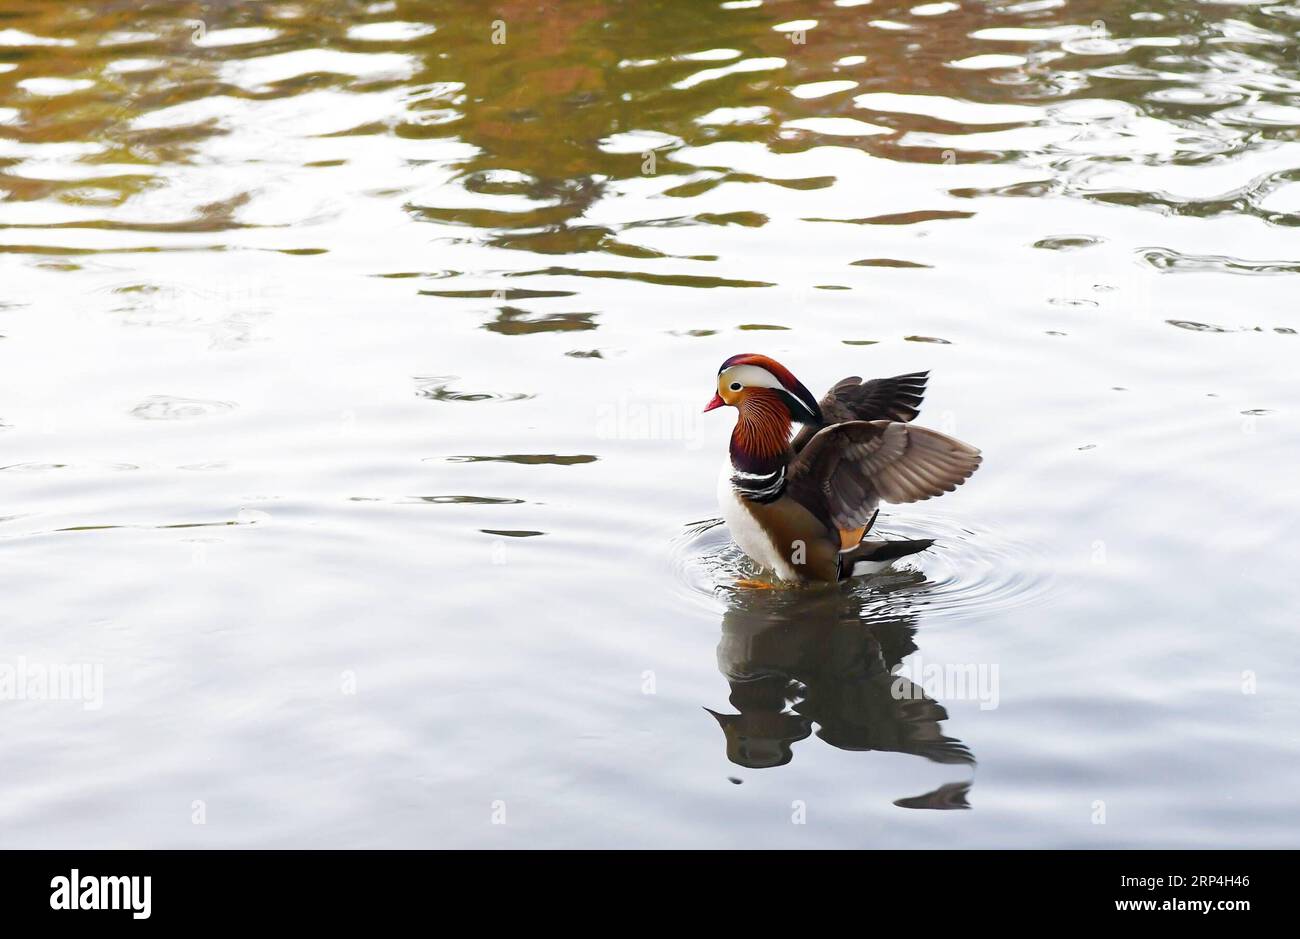 (181109) -- NEW YORK, Nov. 9, 2018 -- A Mandarin duck paddles on a pond at the Central Park in New York, the United States, on Nov. 8, 2018. Mandarin ducks are native to East Asia and renowned for their dazzling multicolored feathers. This rare Mandarin duck, first spotted in early October, has become a new star at the Central Park, one of New York City s most-visited attractions. ) (yk) U.S.-NEW YORK-MANDARIN DUCK LixRui PUBLICATIONxNOTxINxCHN Stock Photo